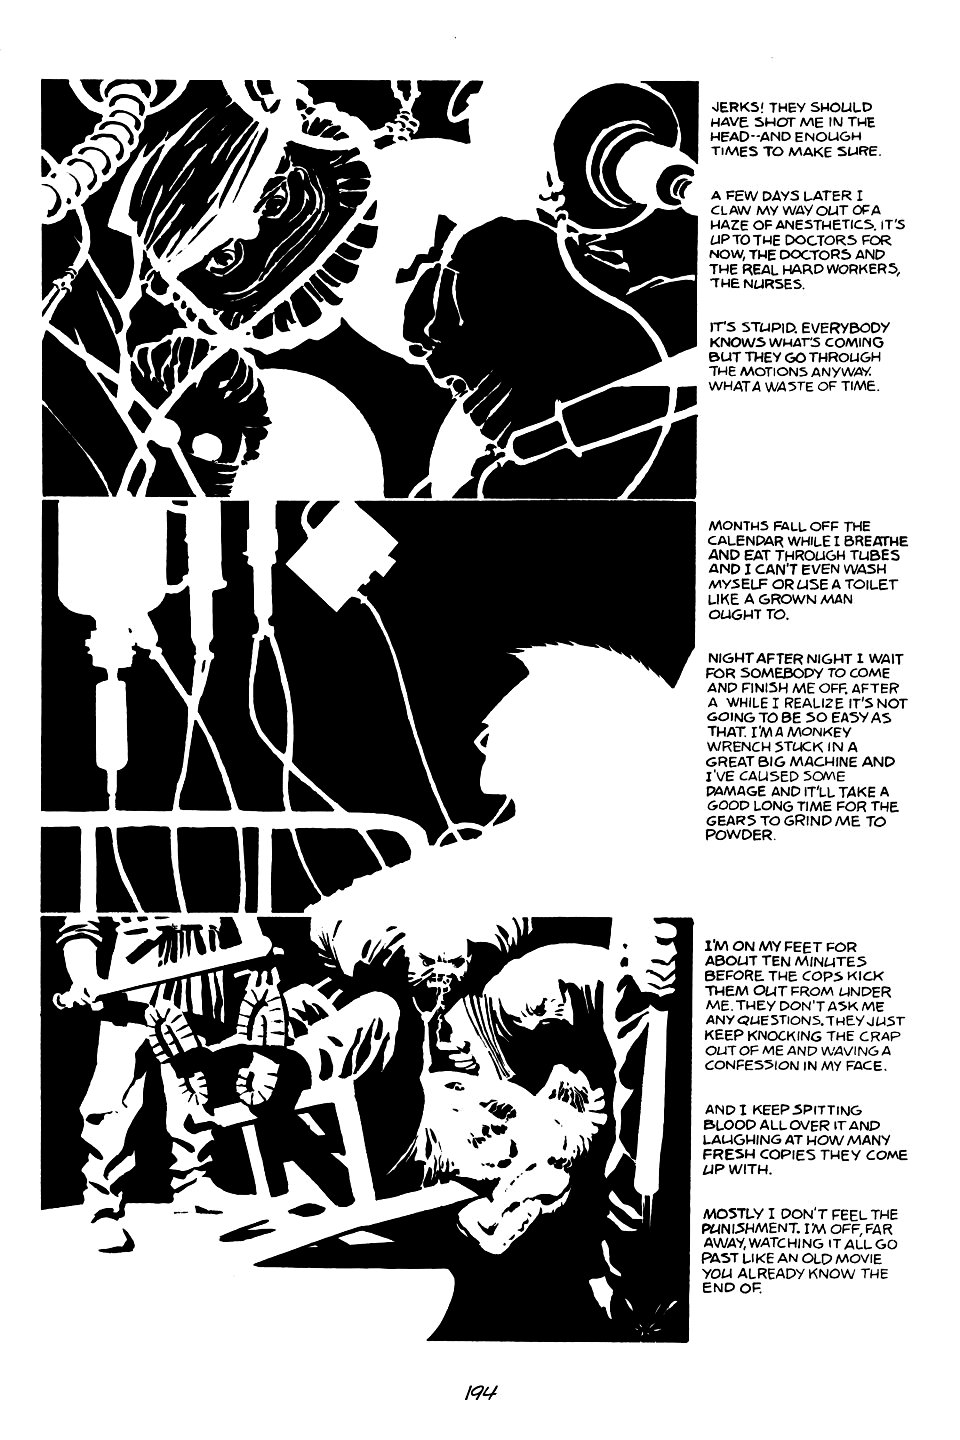 page 194 of sin city 1 the hard goodbye